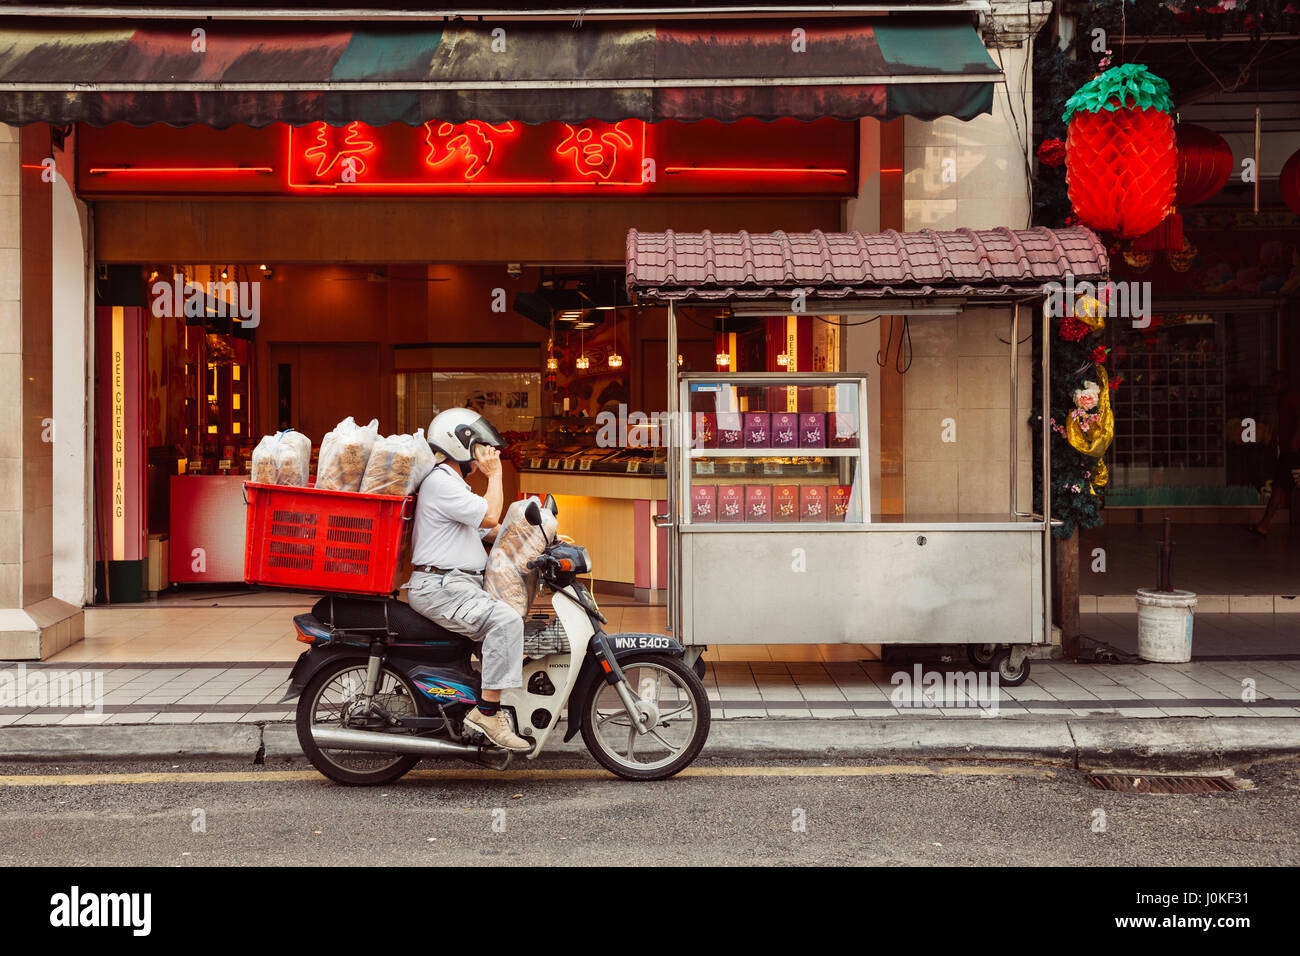 Kuala Lumpur, Malaysia - March 17, 2016:  Man delivering supplies to Chinese restaurant in Chinatown, Kuala Lumpur, Malaysia on March 17, 2016. Stock Photo